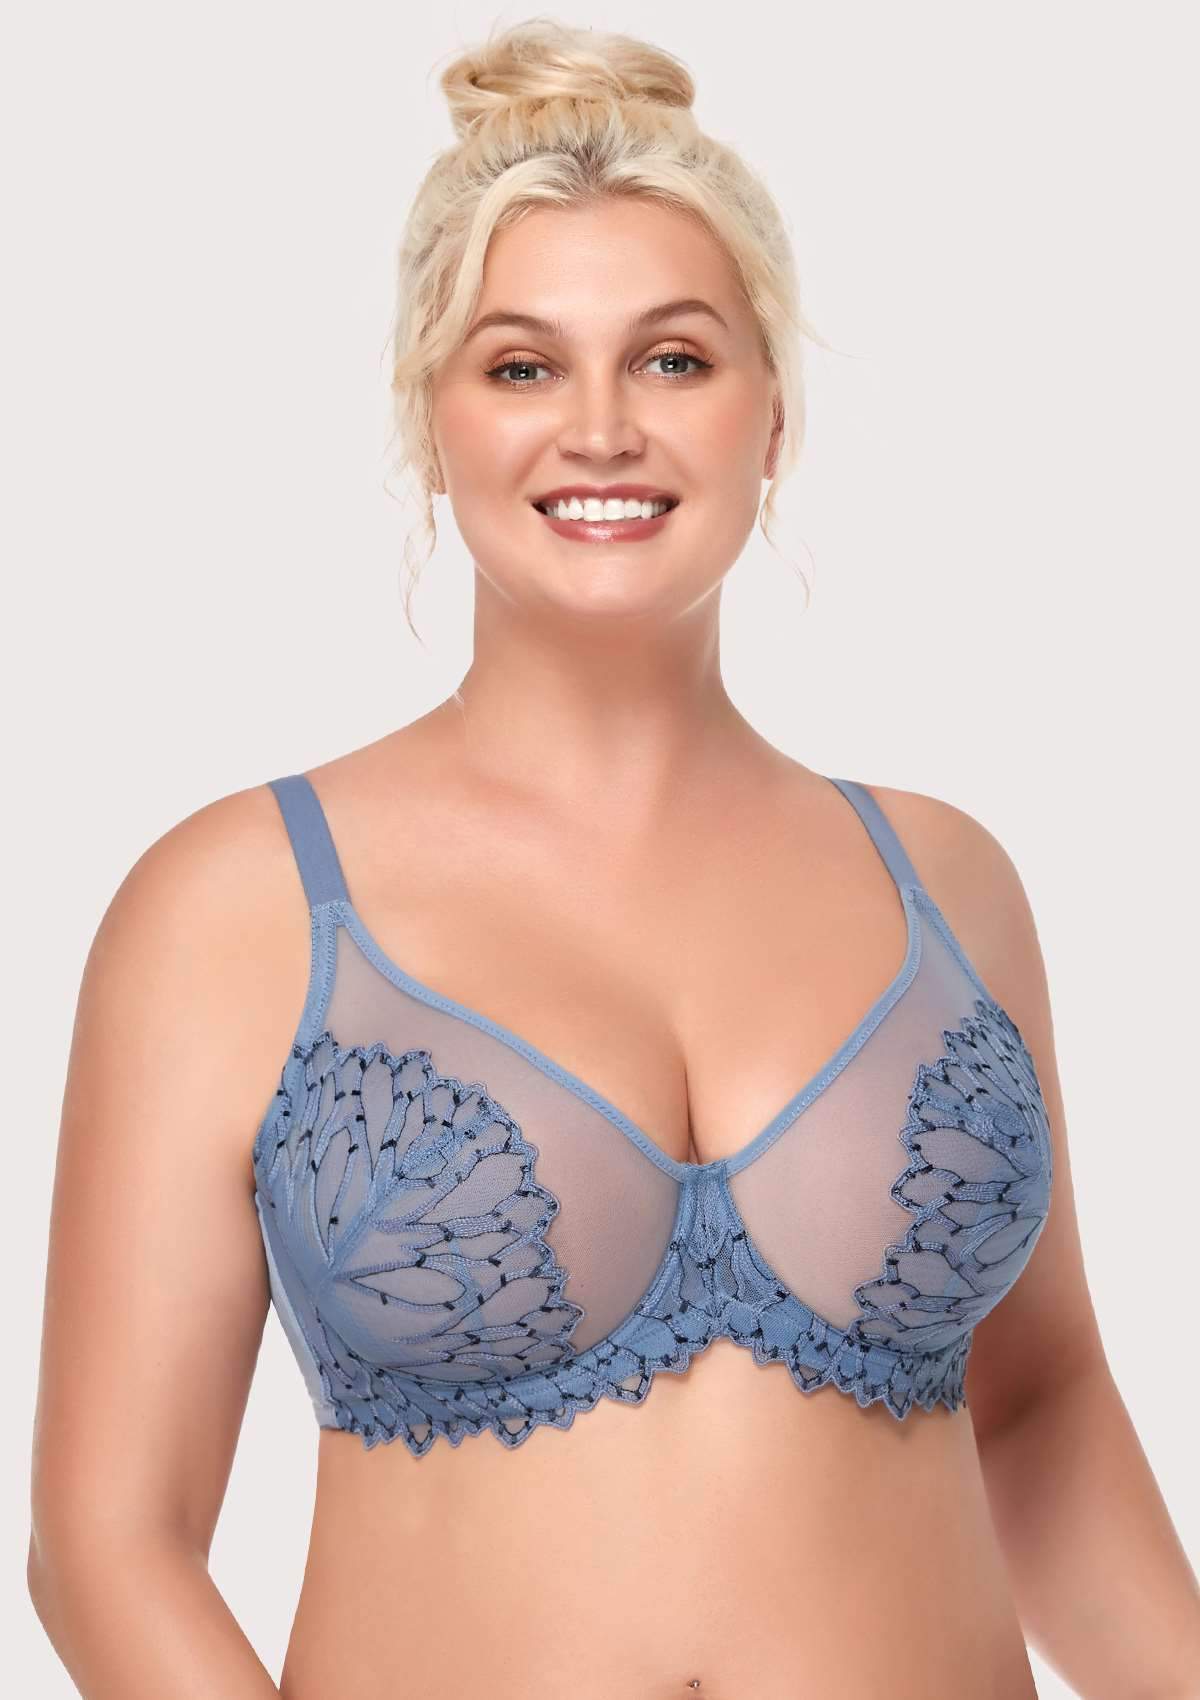 HSIA Chrysanthemum Plus Size Lace Bra: Back Support Bra For Posture - Light Pink / 36 / C